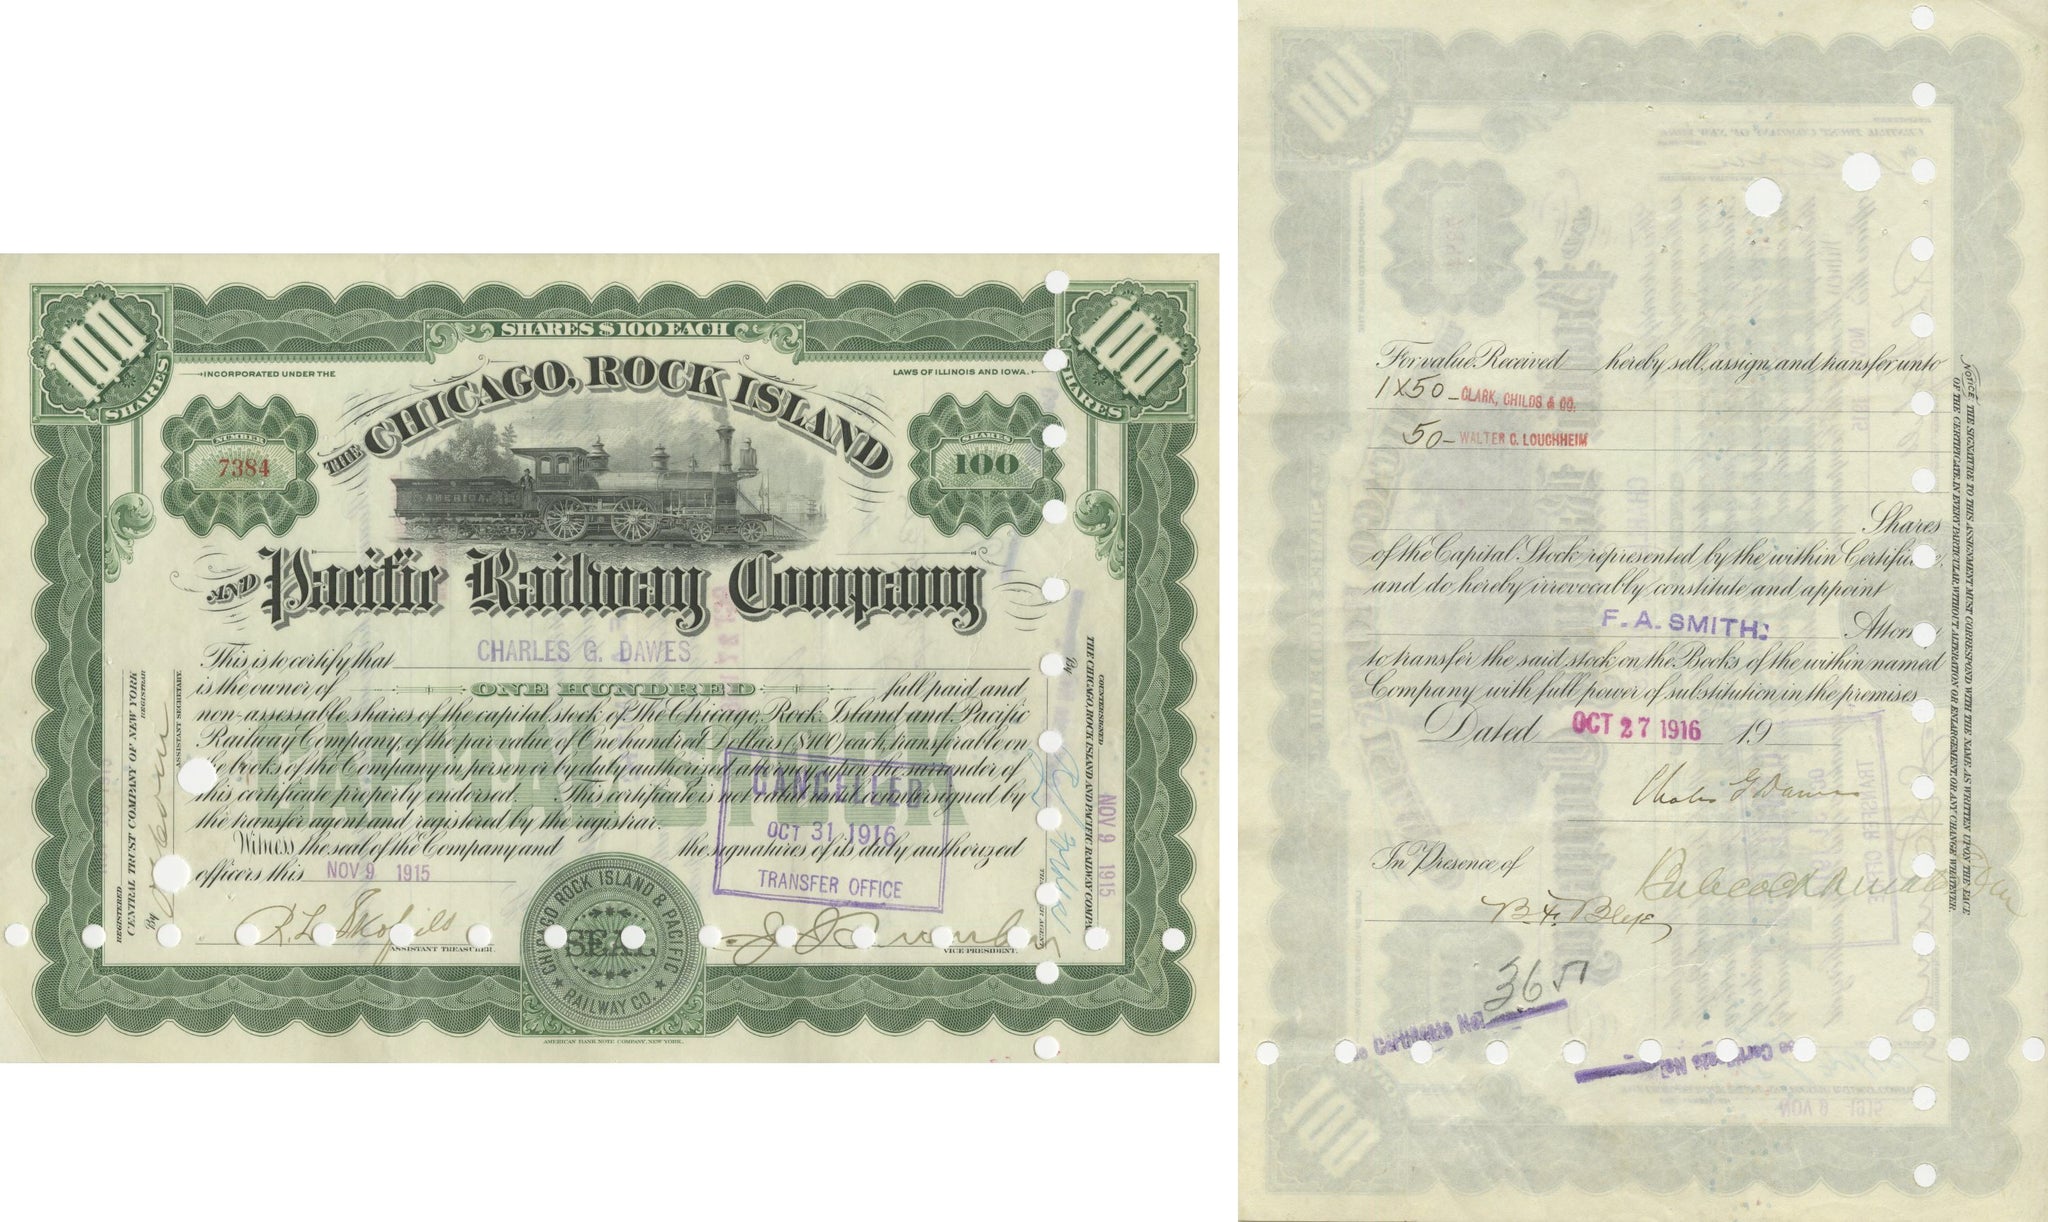 CHARLES G. DAWES - 30TH U.S. VICE PRESIDENT - AUTOGRAPHED 1916 PACIFIC RAILWAY STOCK CERTIFICATE